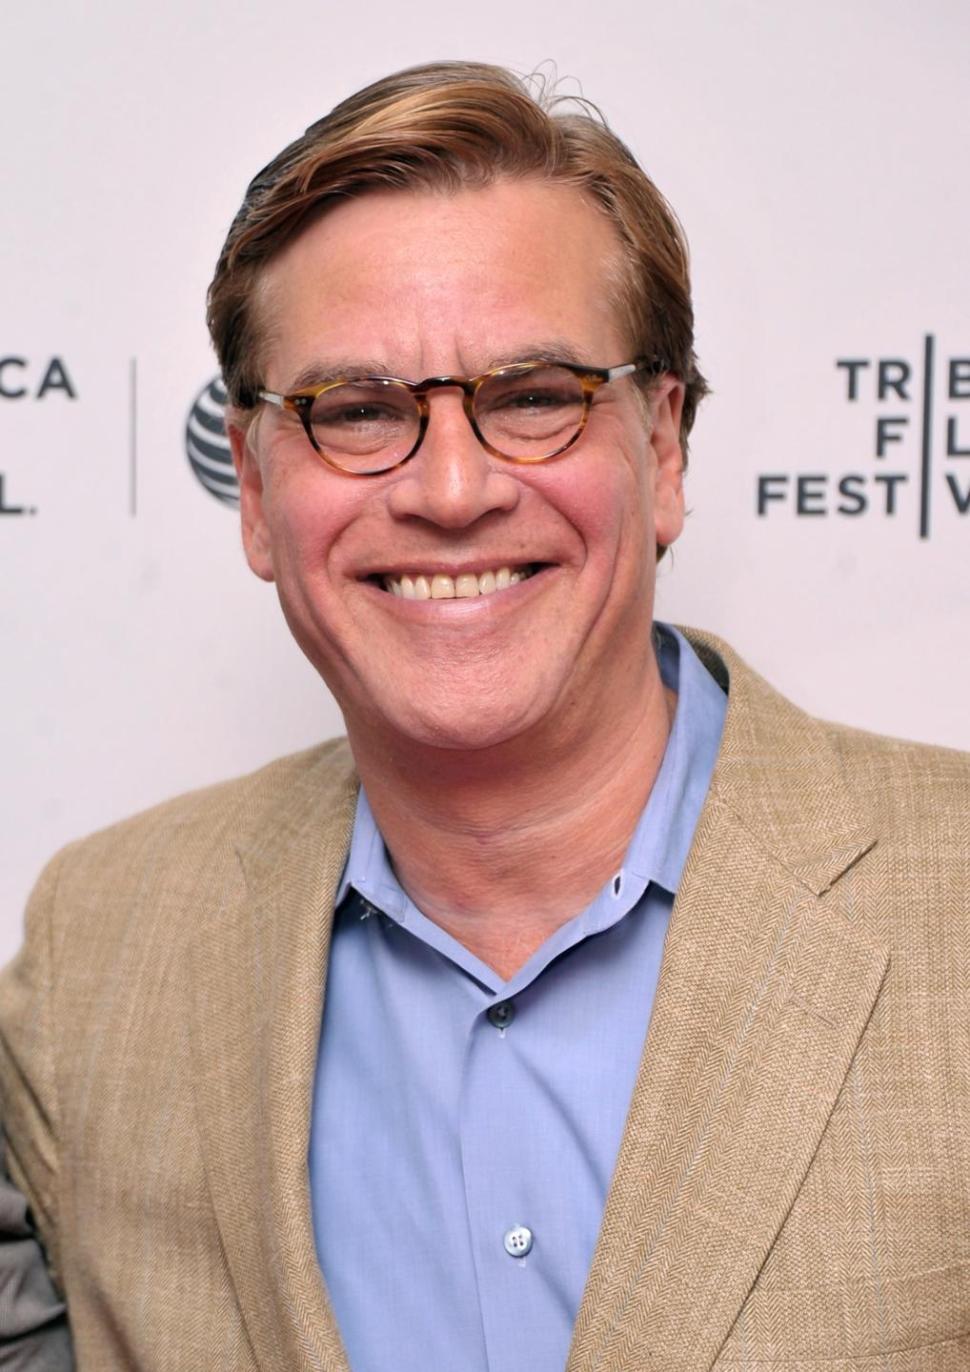 Screenwriter Aaron Sorkin is among many others to express opinions on the Sony hacking scandal.